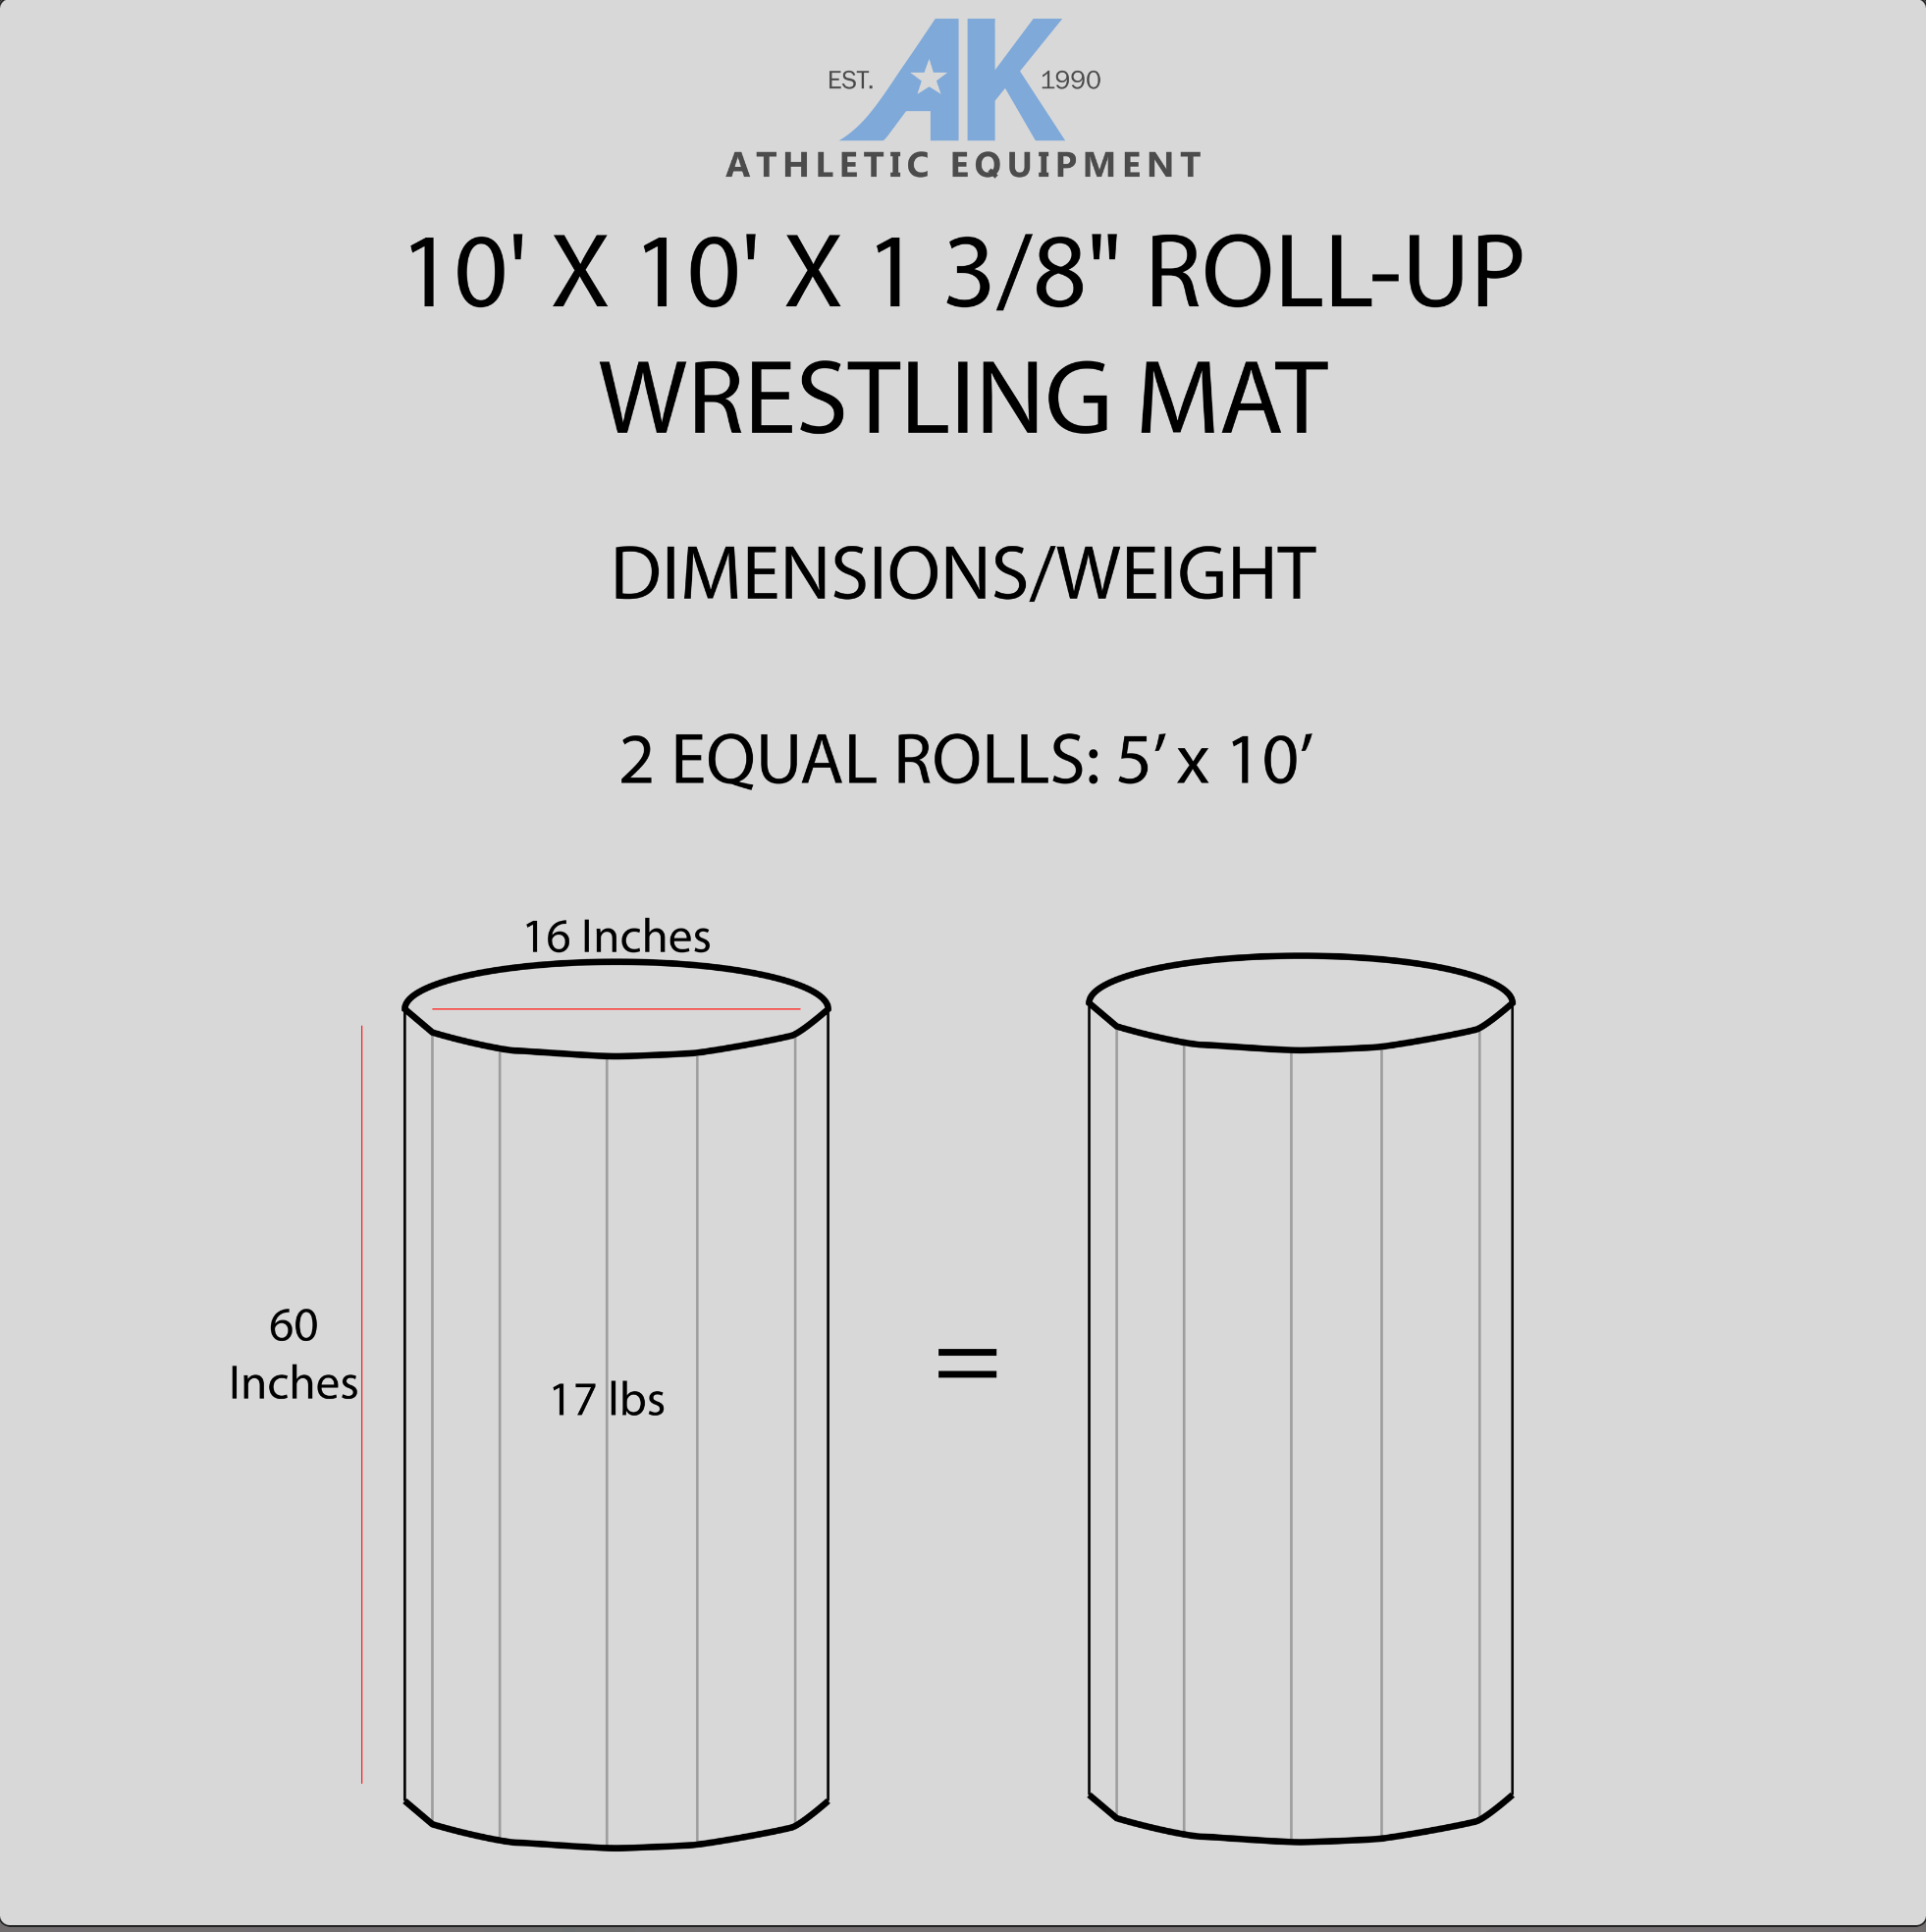 Storage dimensions for AK Athletics wrestling mats. Easy to use, easy to store. Industry leader in protective floor mats. 